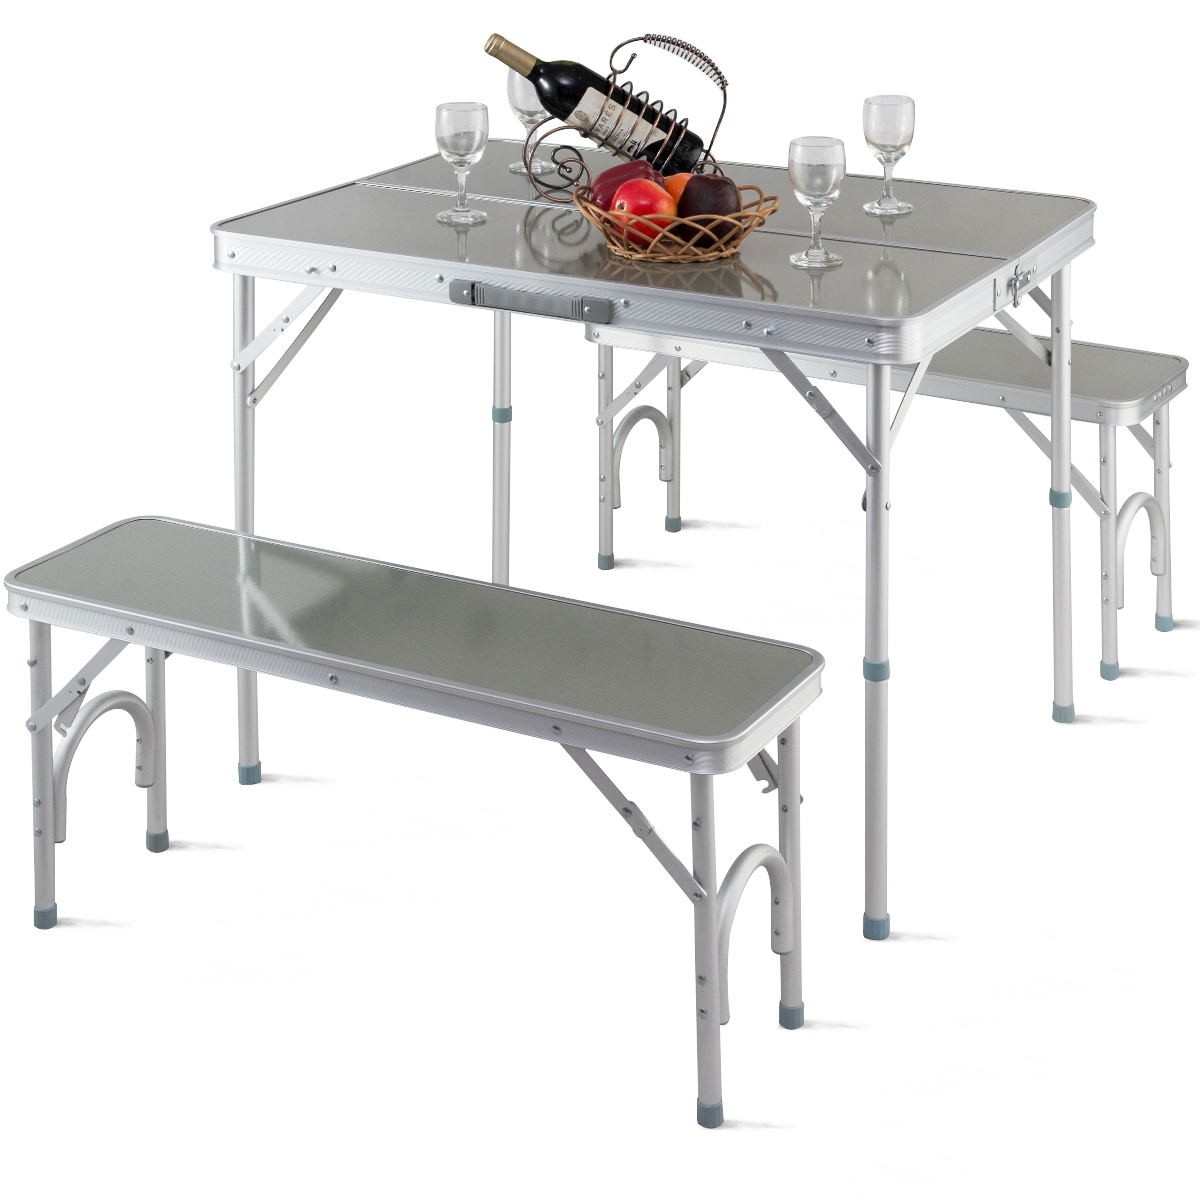 Aluminum Portable Folding Picnic Table With 2 Benches